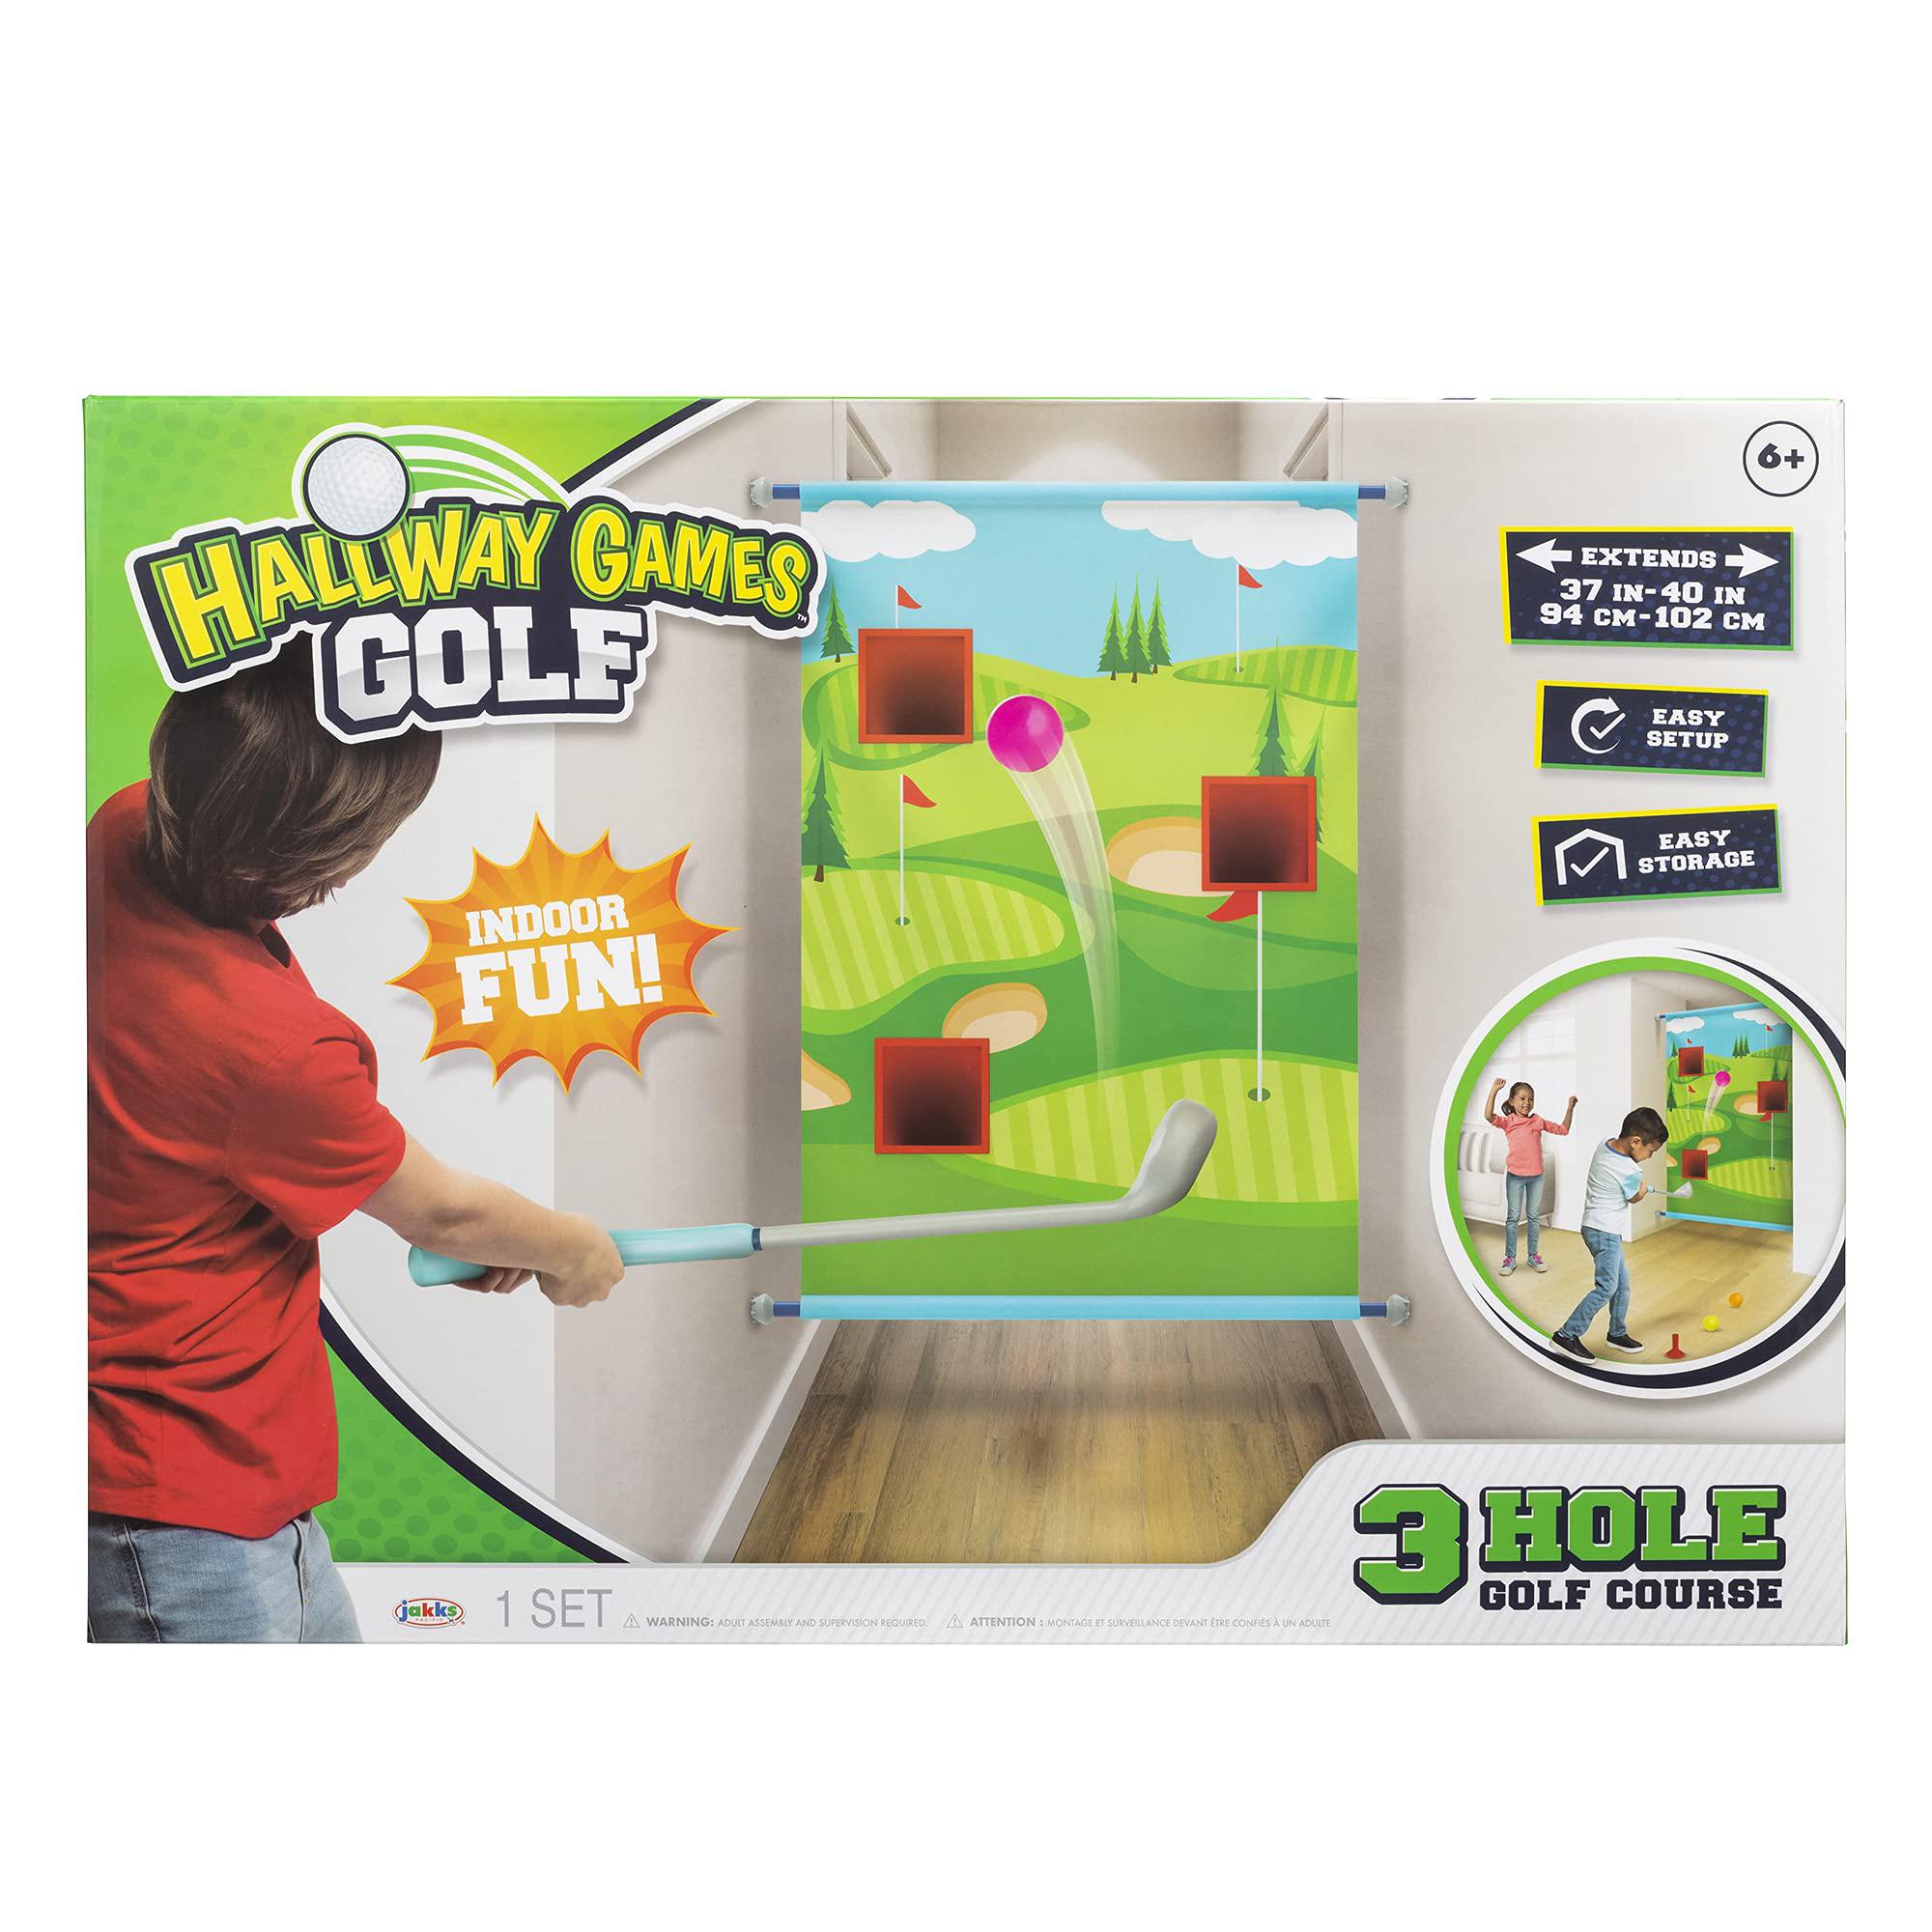 maui toys golf indoor hallway games! fun 3 hole golf course with 3 golf balls, 1 driver & 1 tee